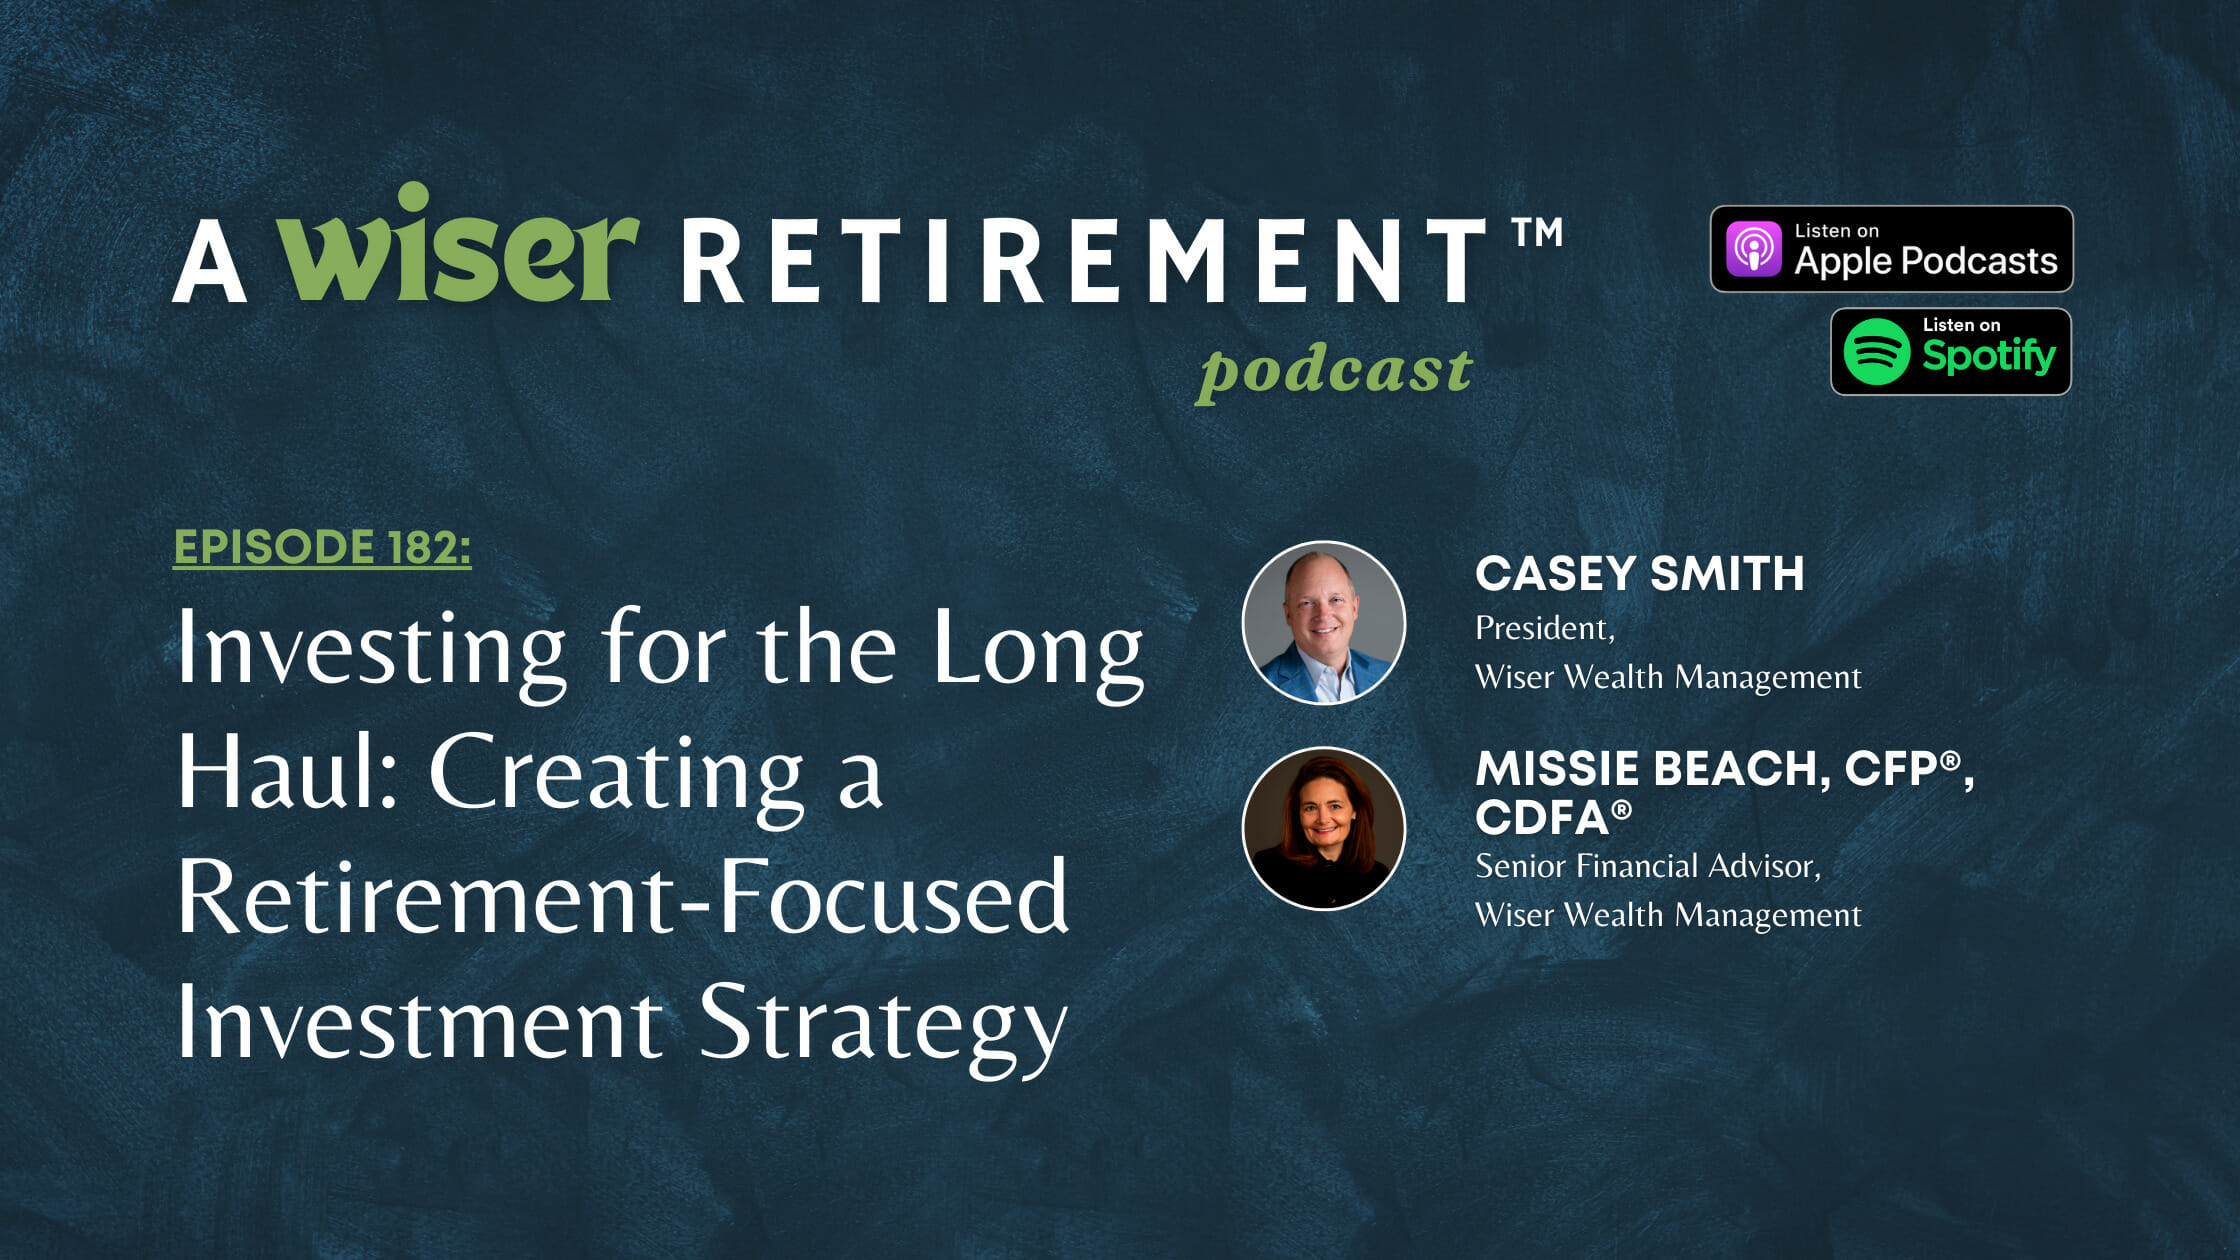 Investing for the Long Haul: Creating a Retirement-Focused Investment Strategy